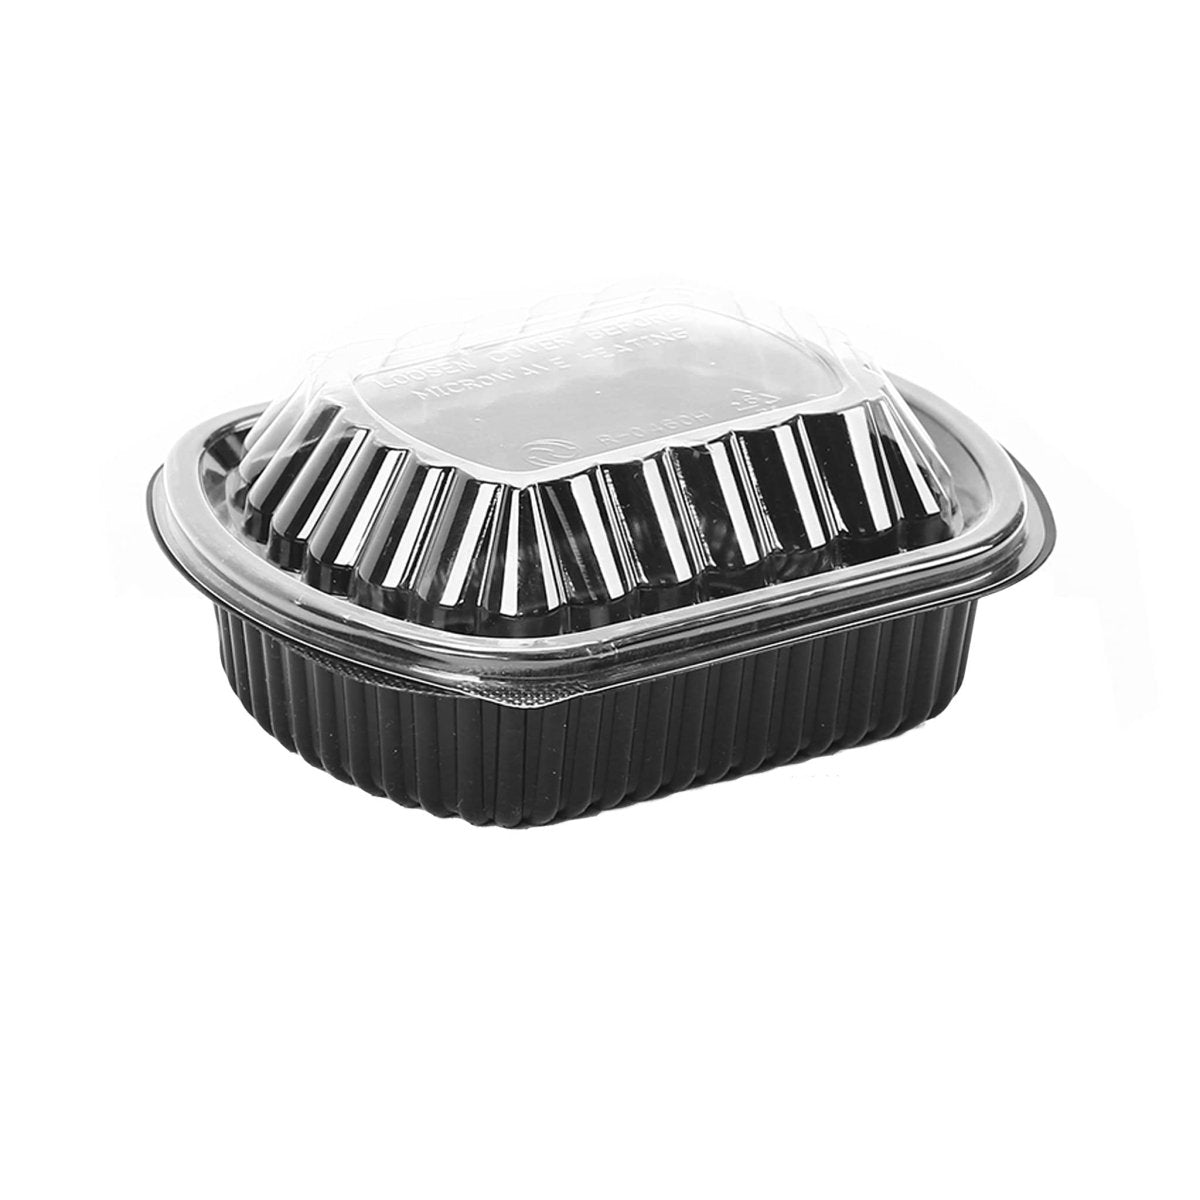 Black Base Rectangular Container 12 oz with Lids 250 Pieces - hotpackwebstore.com - Black Base Containers